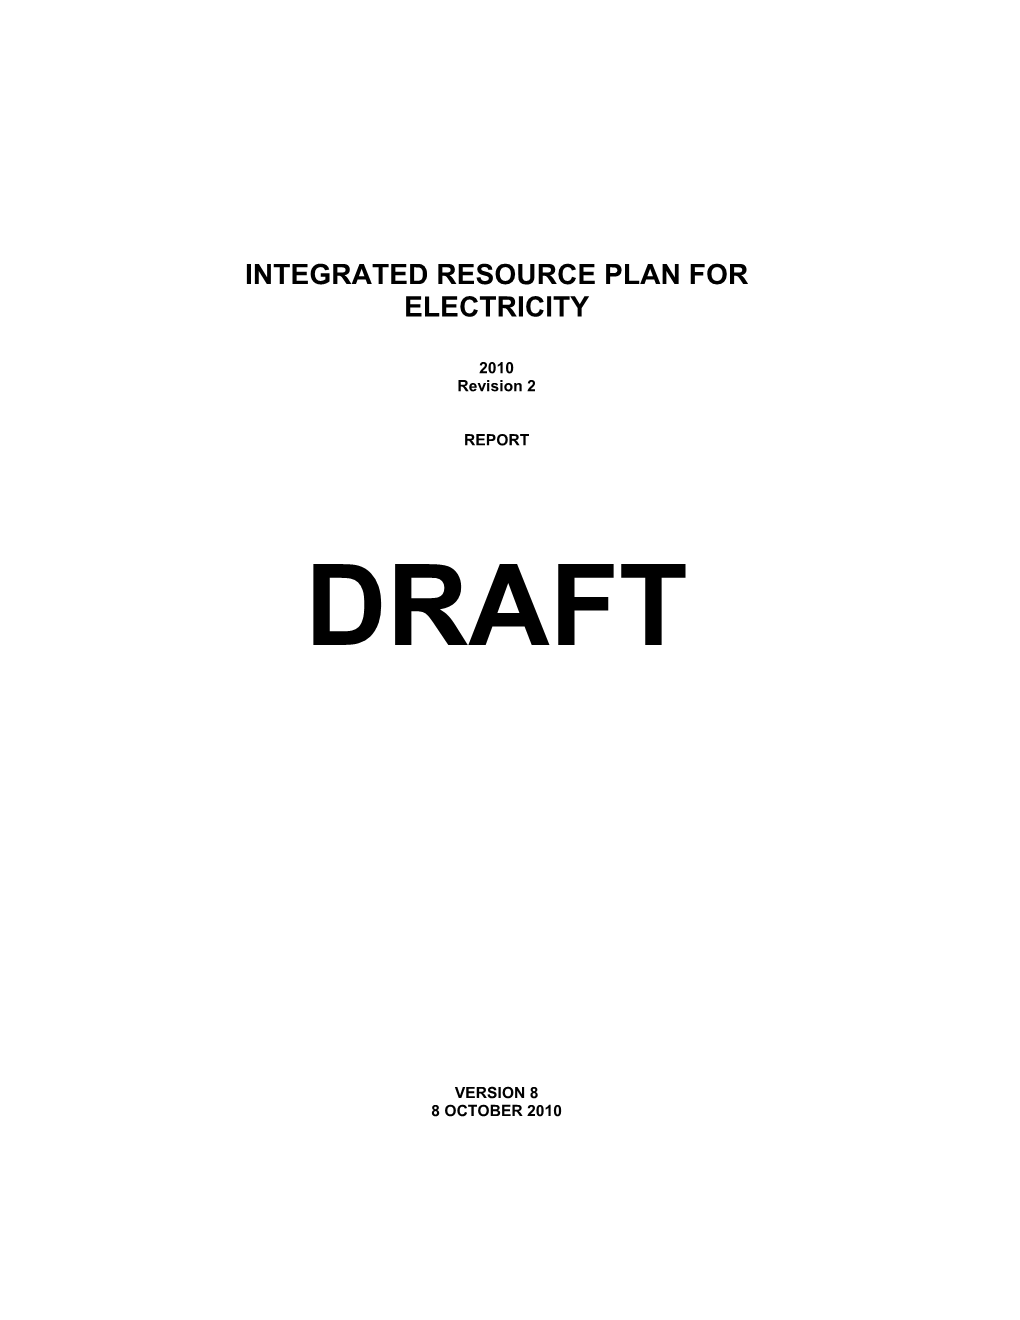 Integrated Resource Plan for Electricity